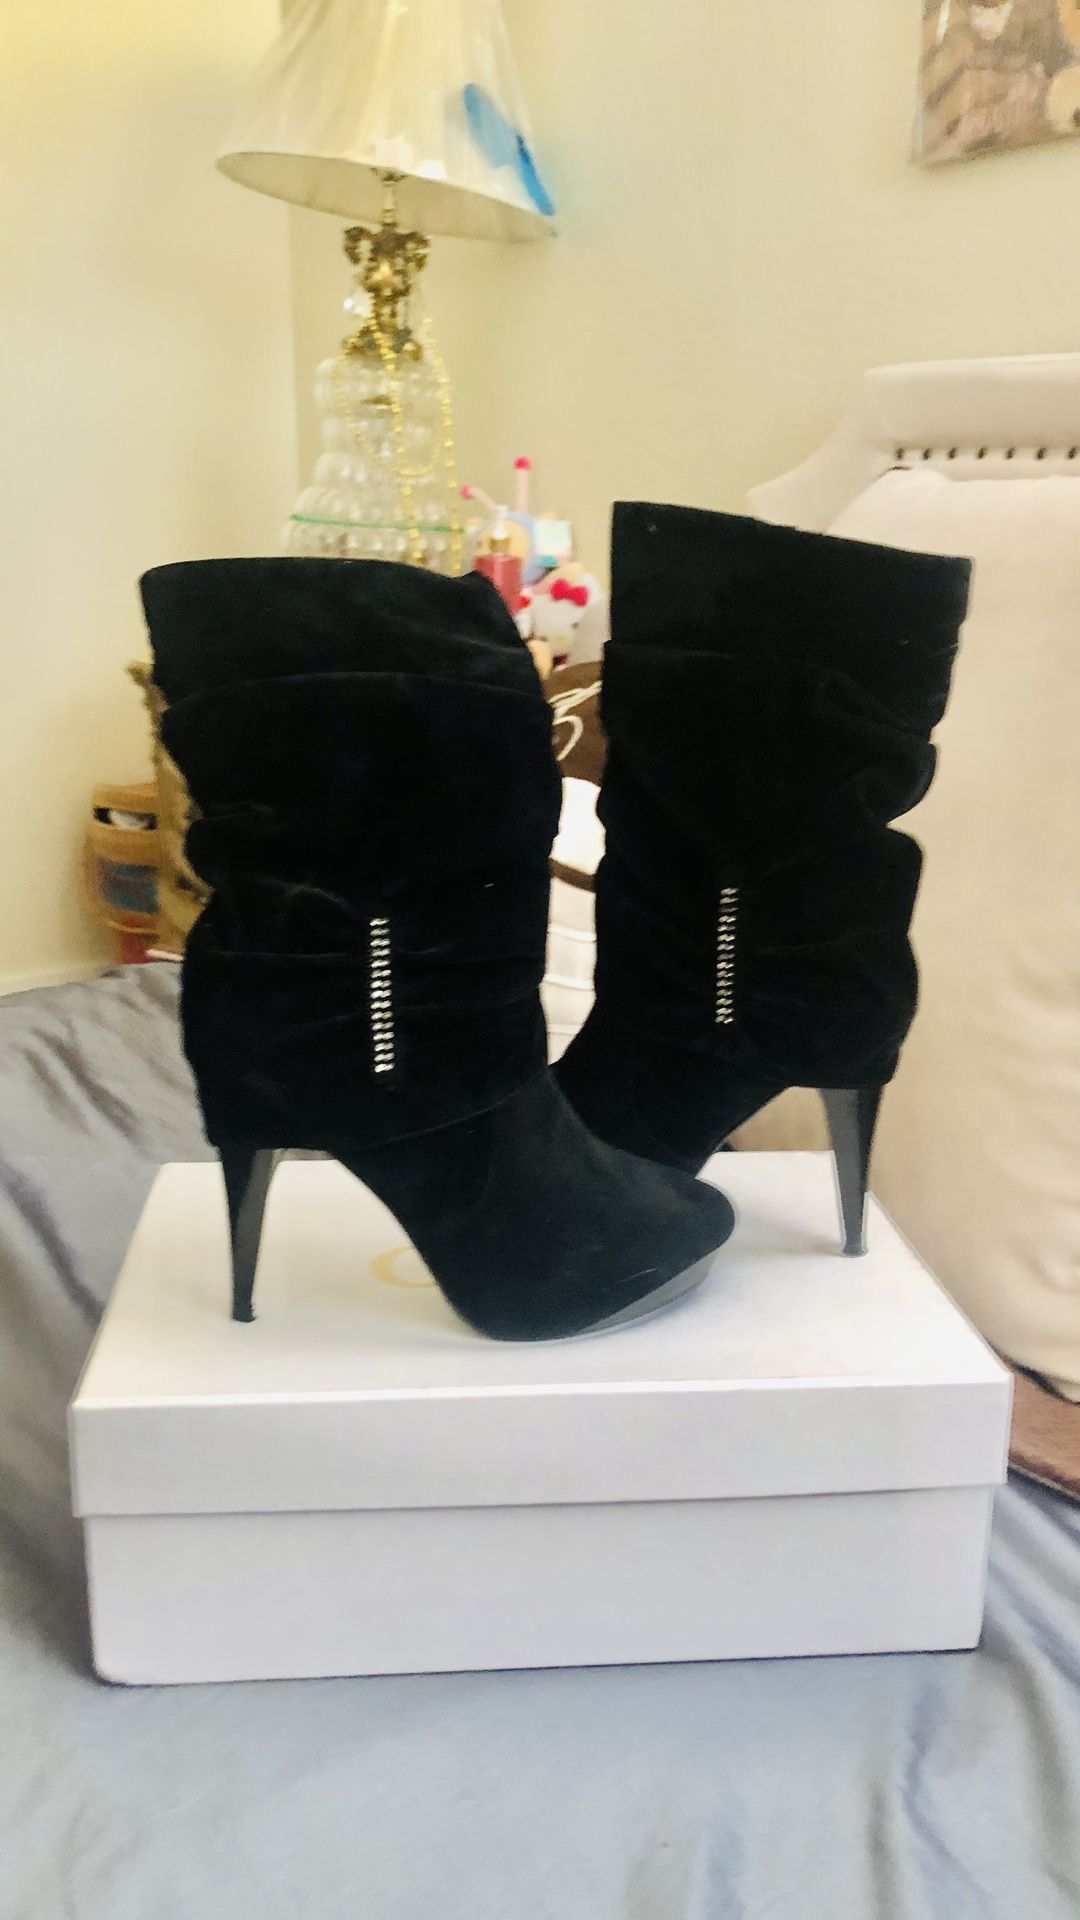 Suede Women Boots $35